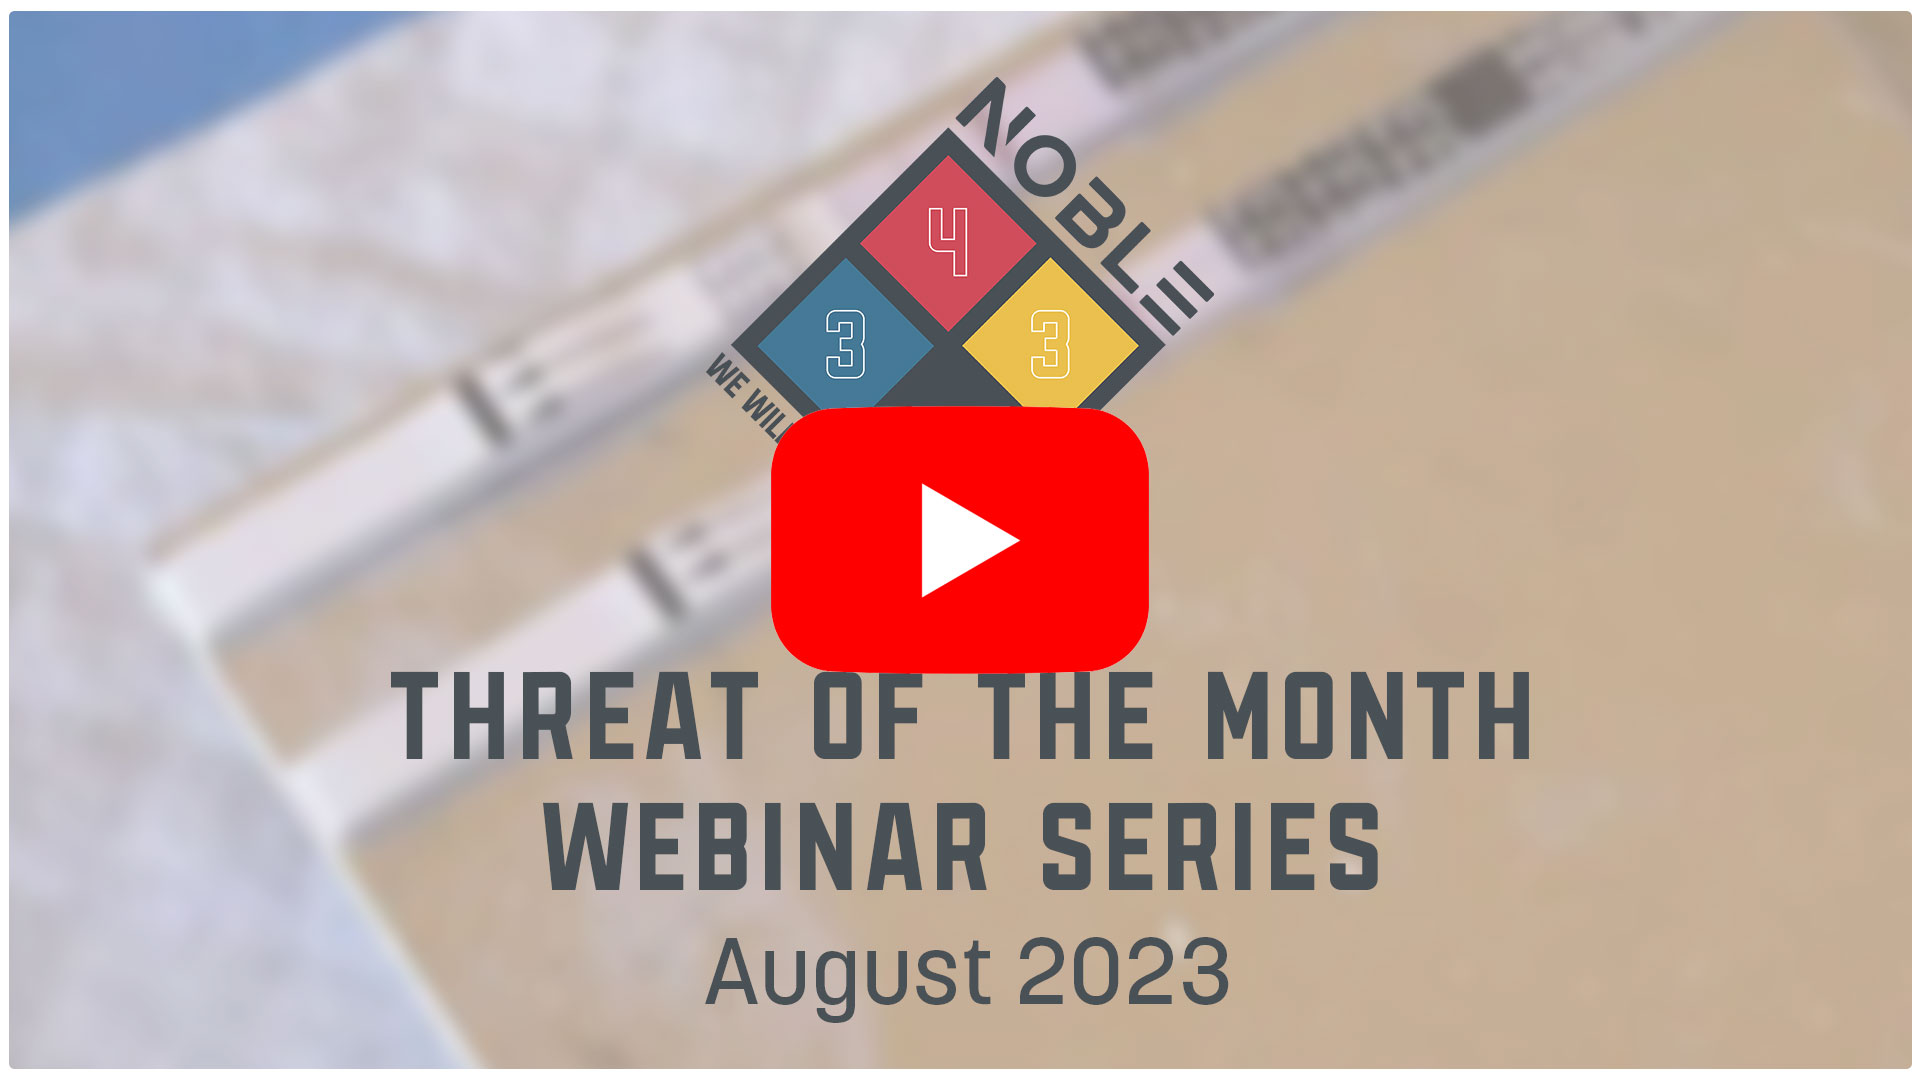 NOBLE Threat of the Month Webinar Series, August 2023